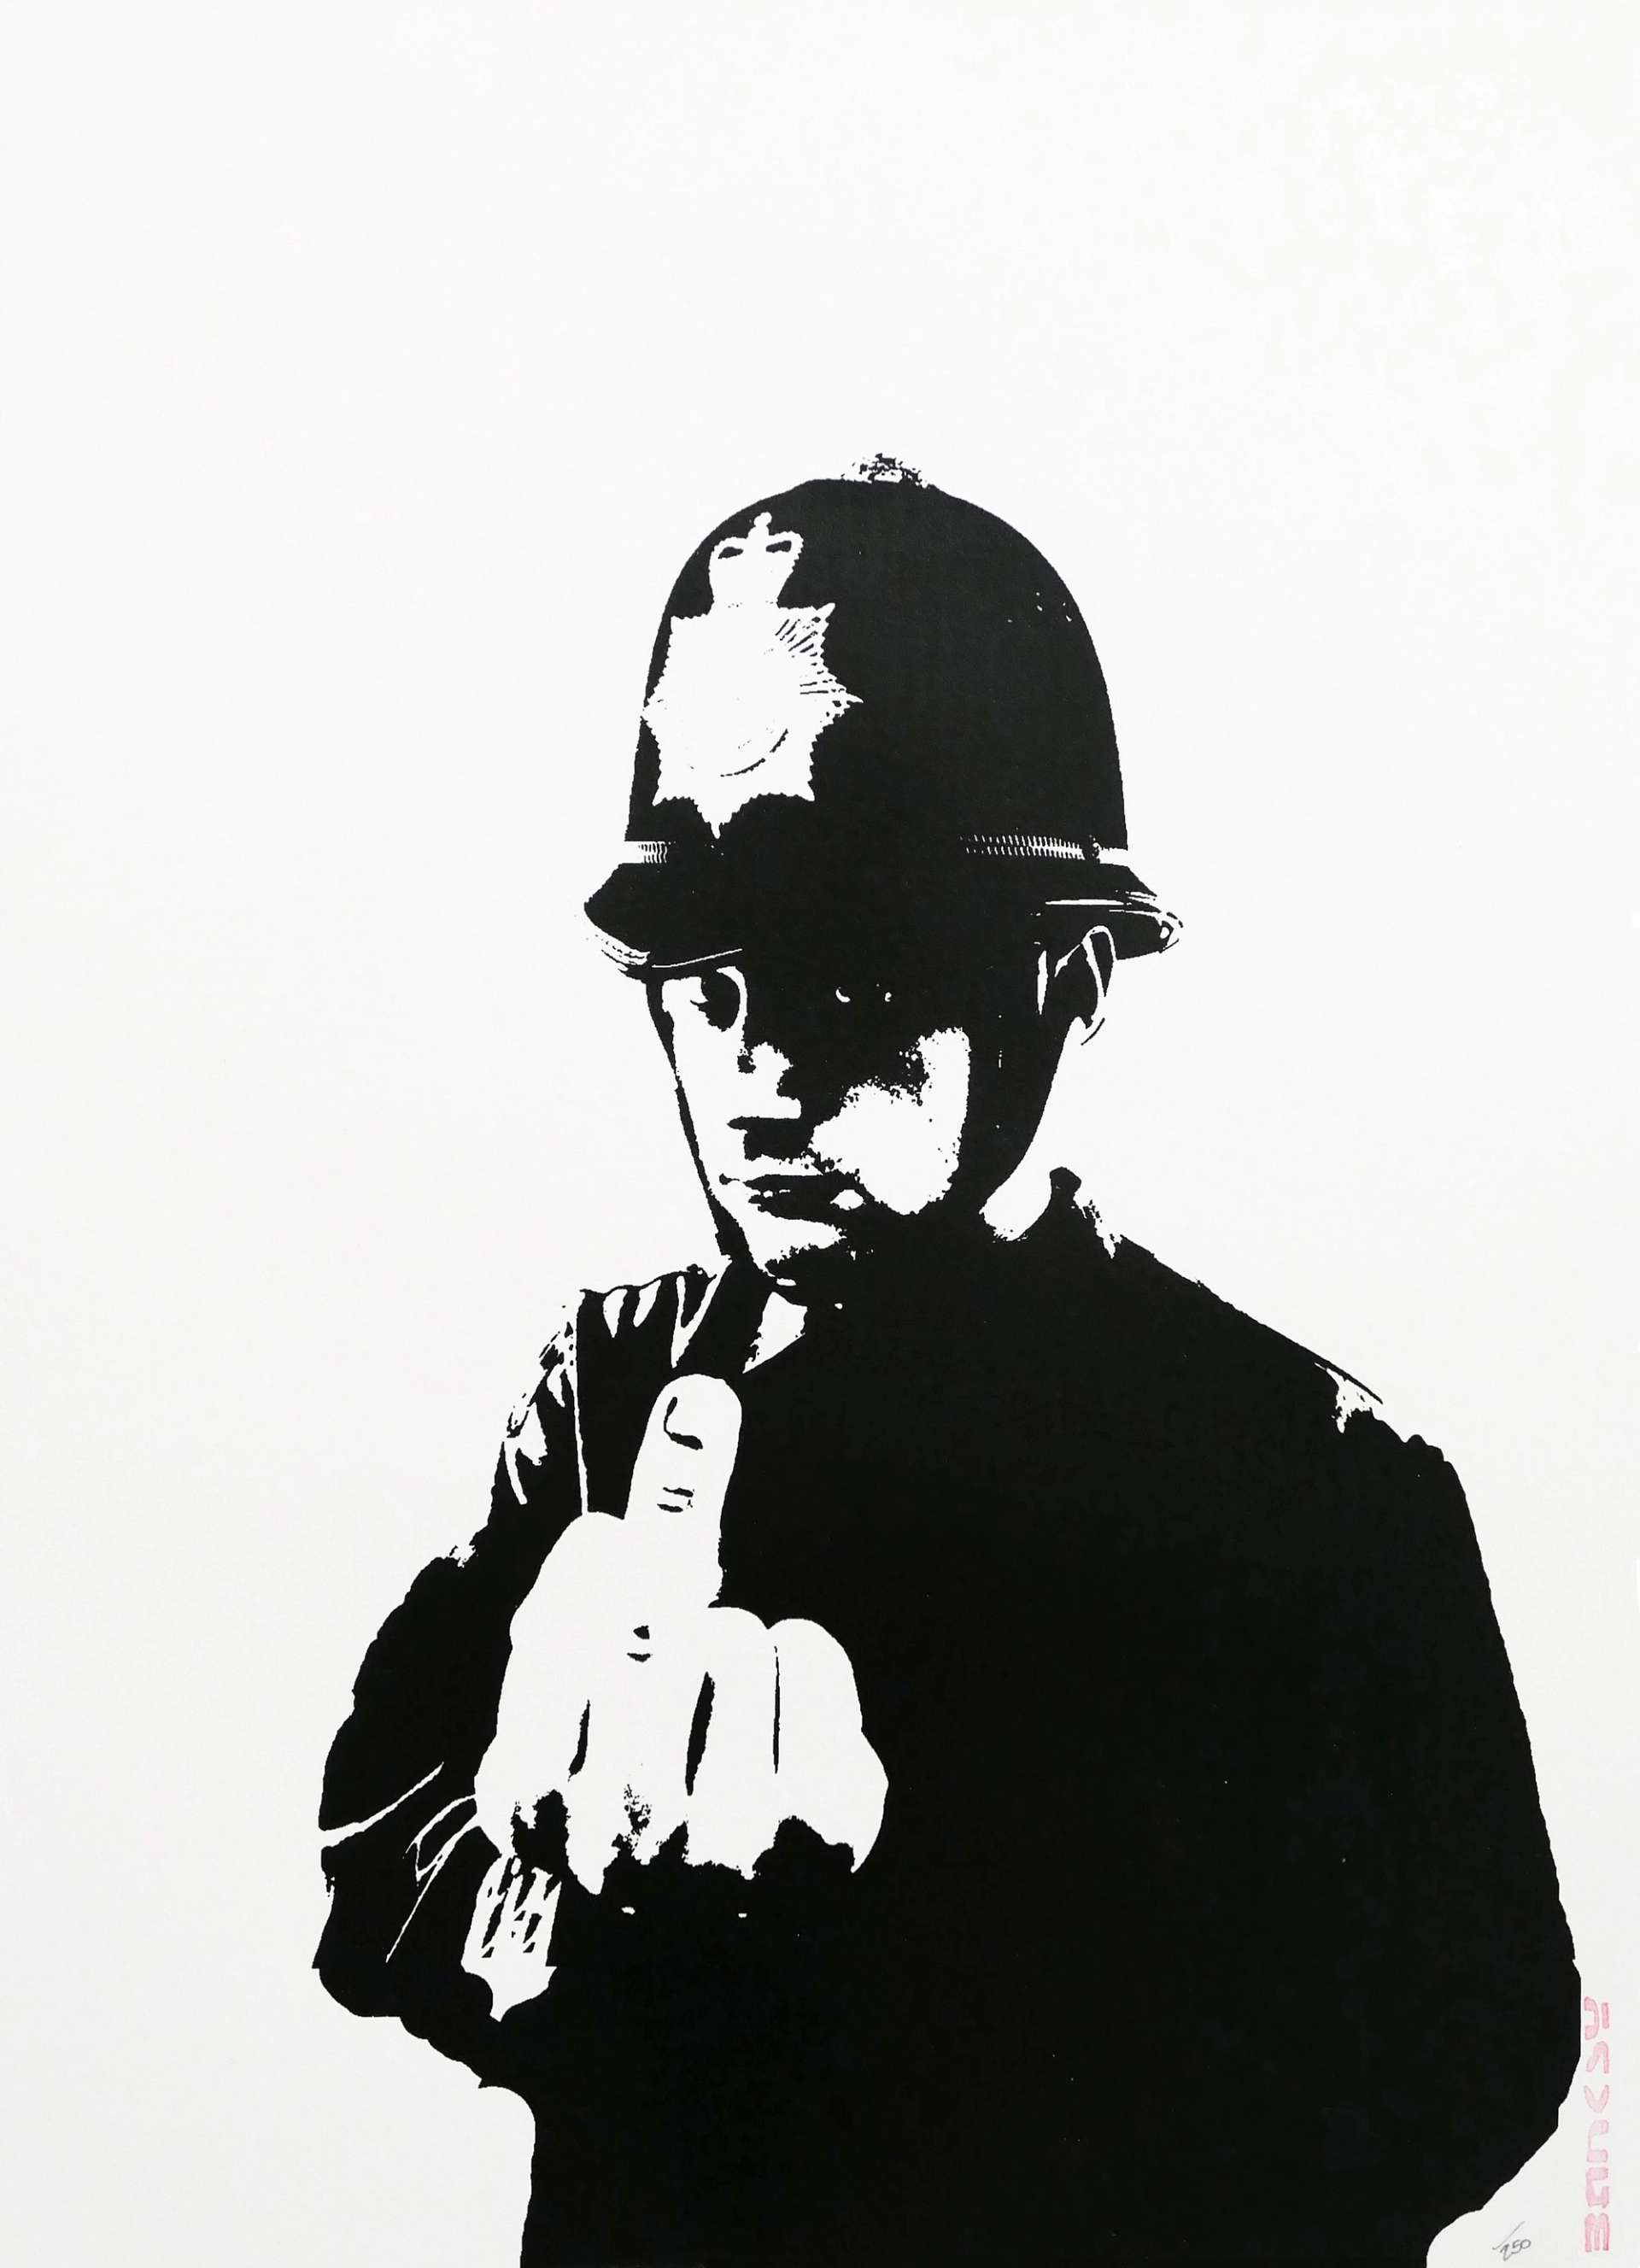 Master of the Stencil: How Does Banksy Make His Art?